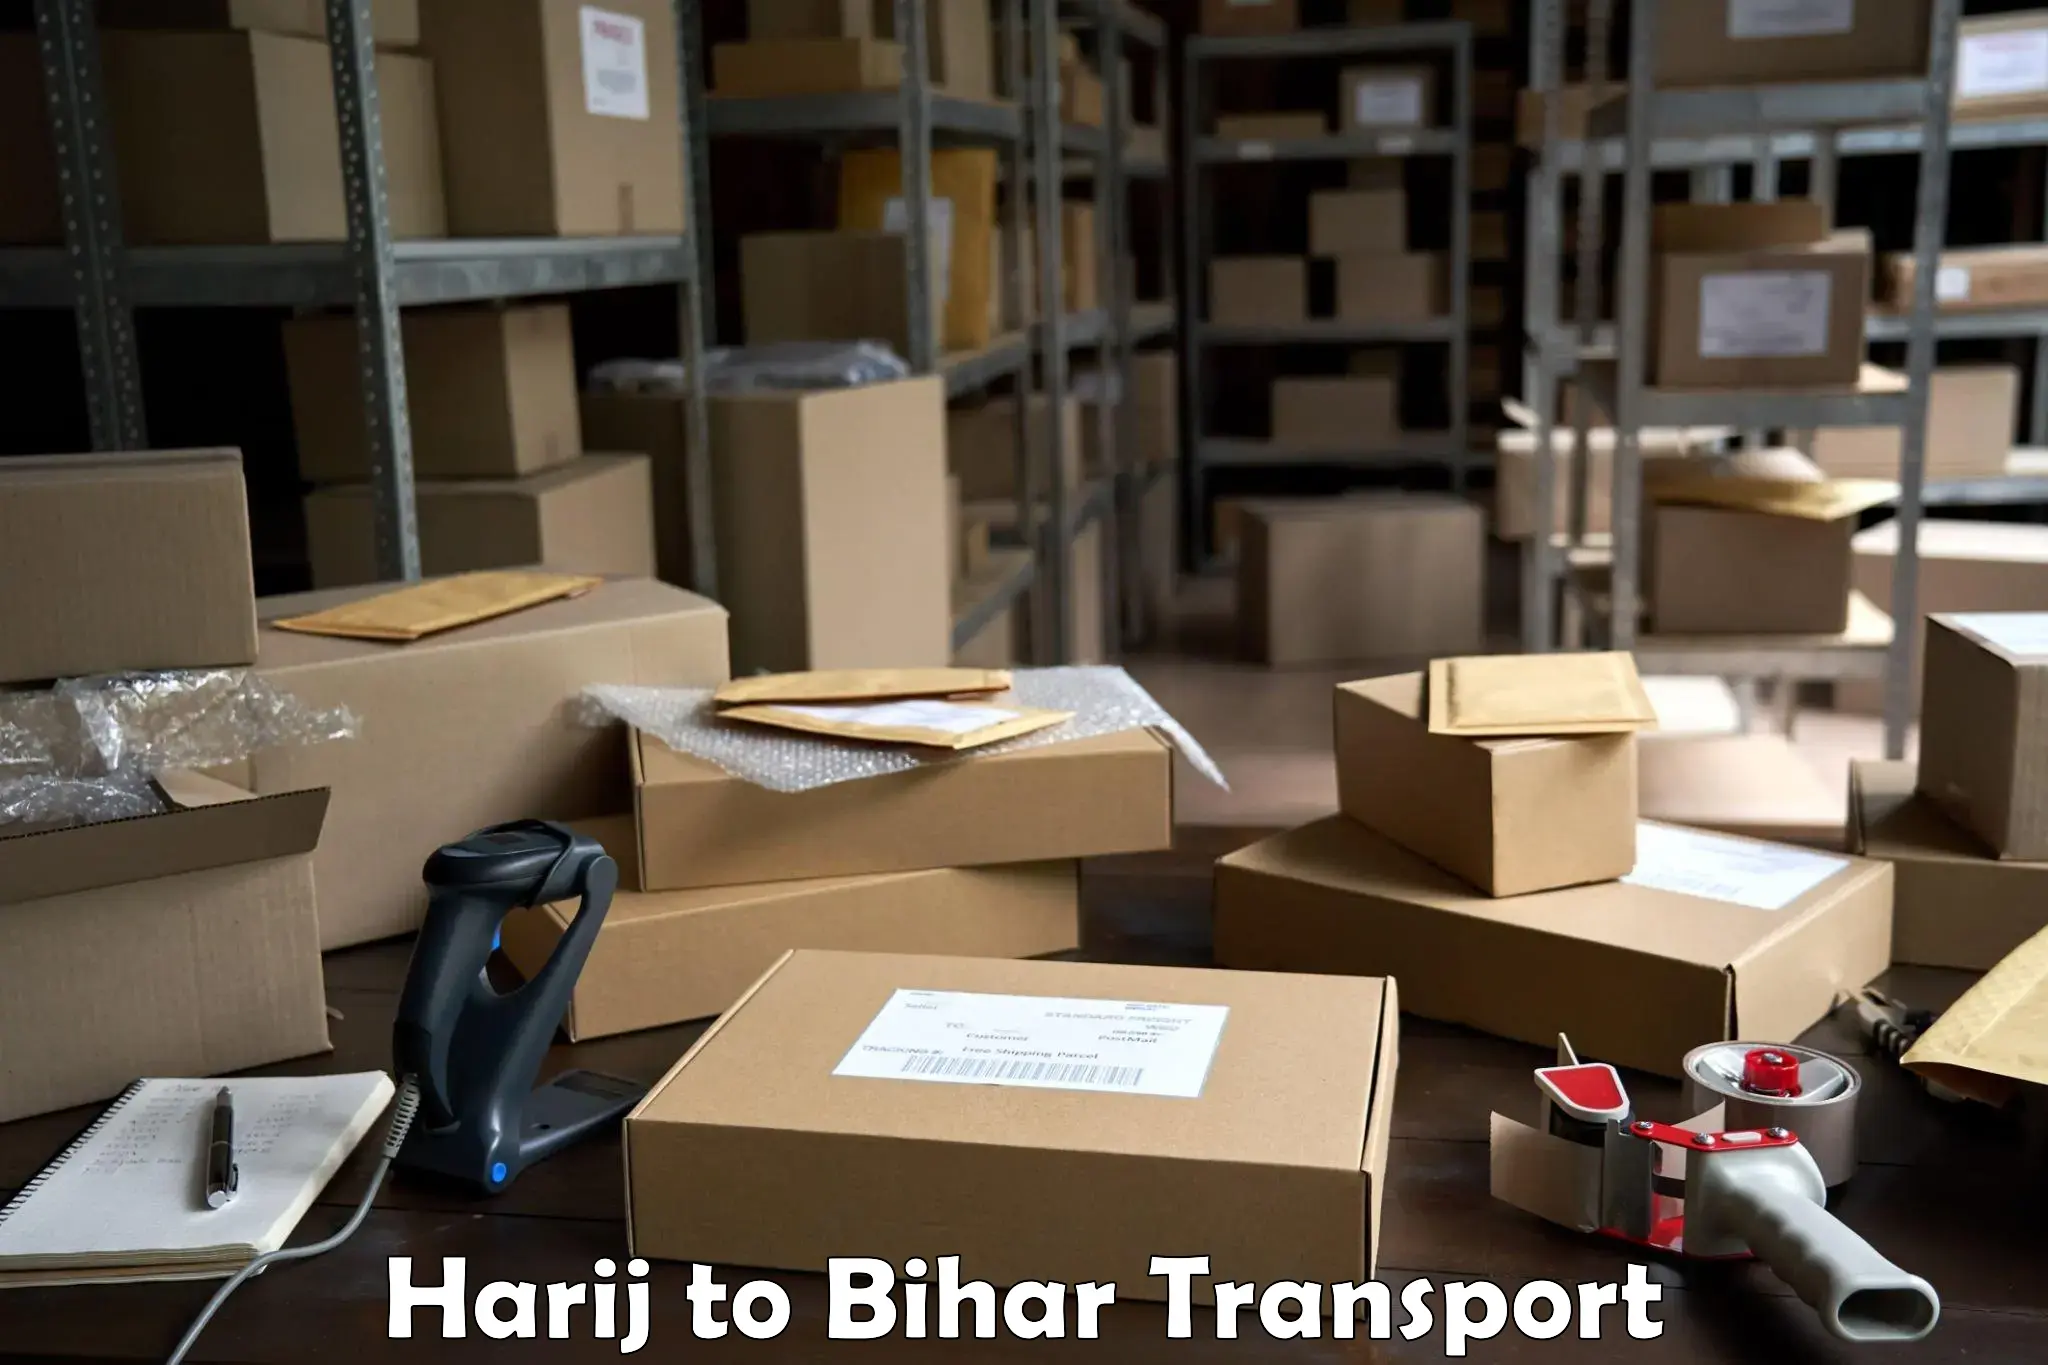 Container transportation services Harij to Kochas